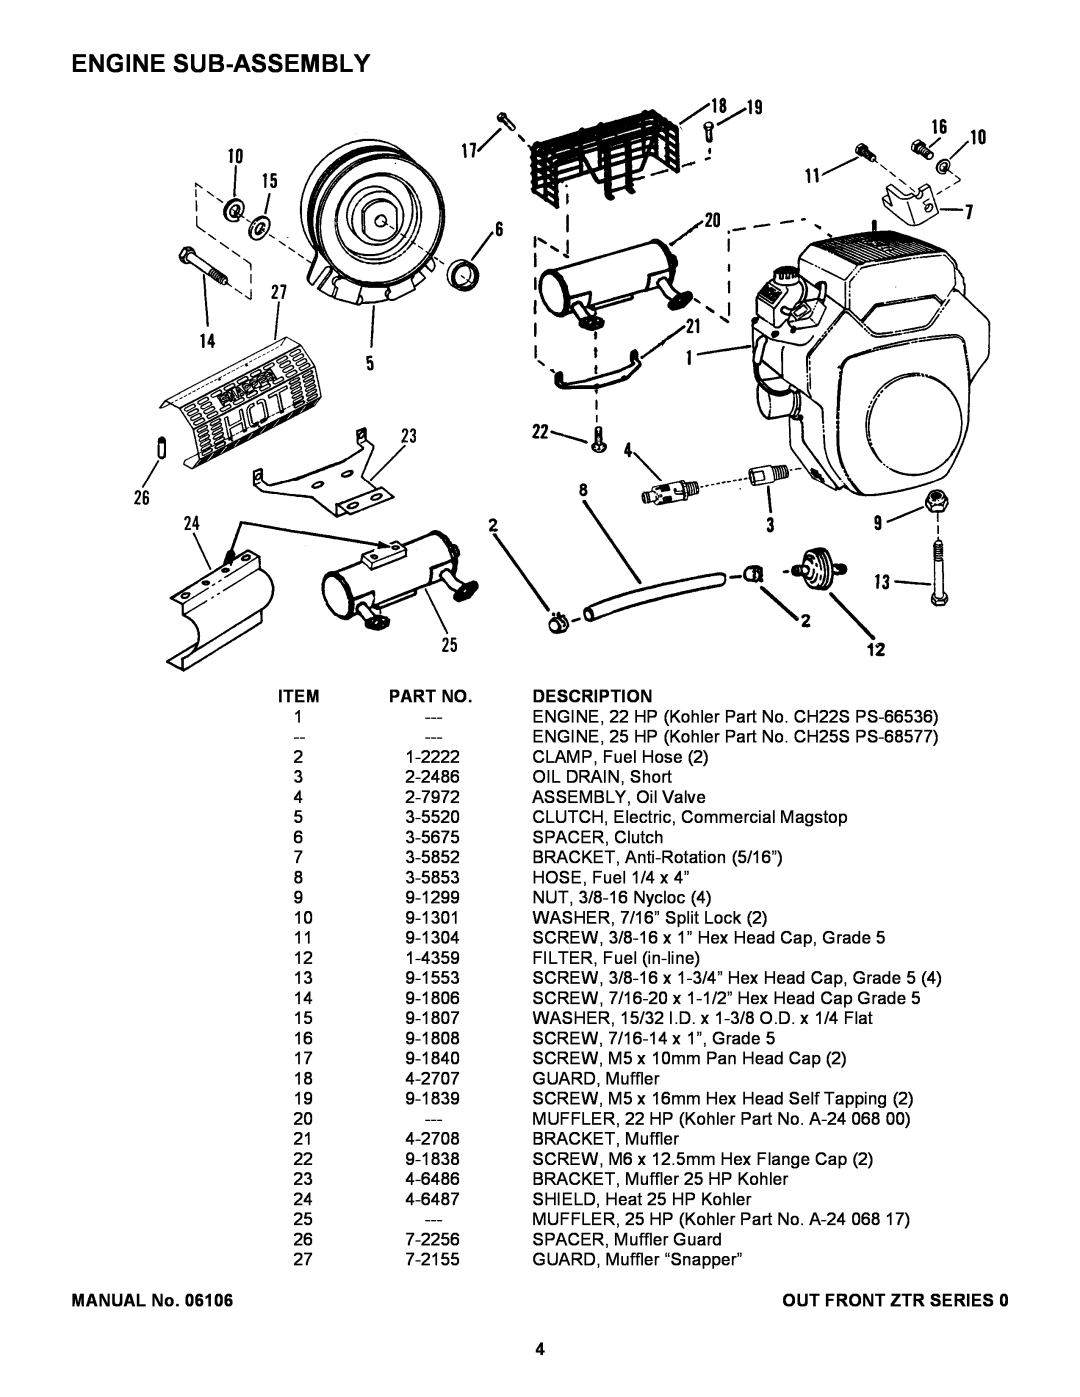 Snapper ZF2500KH, ZF2200K manual Engine Sub-Assembly, Description, MANUAL No, Out Front Ztr Series 